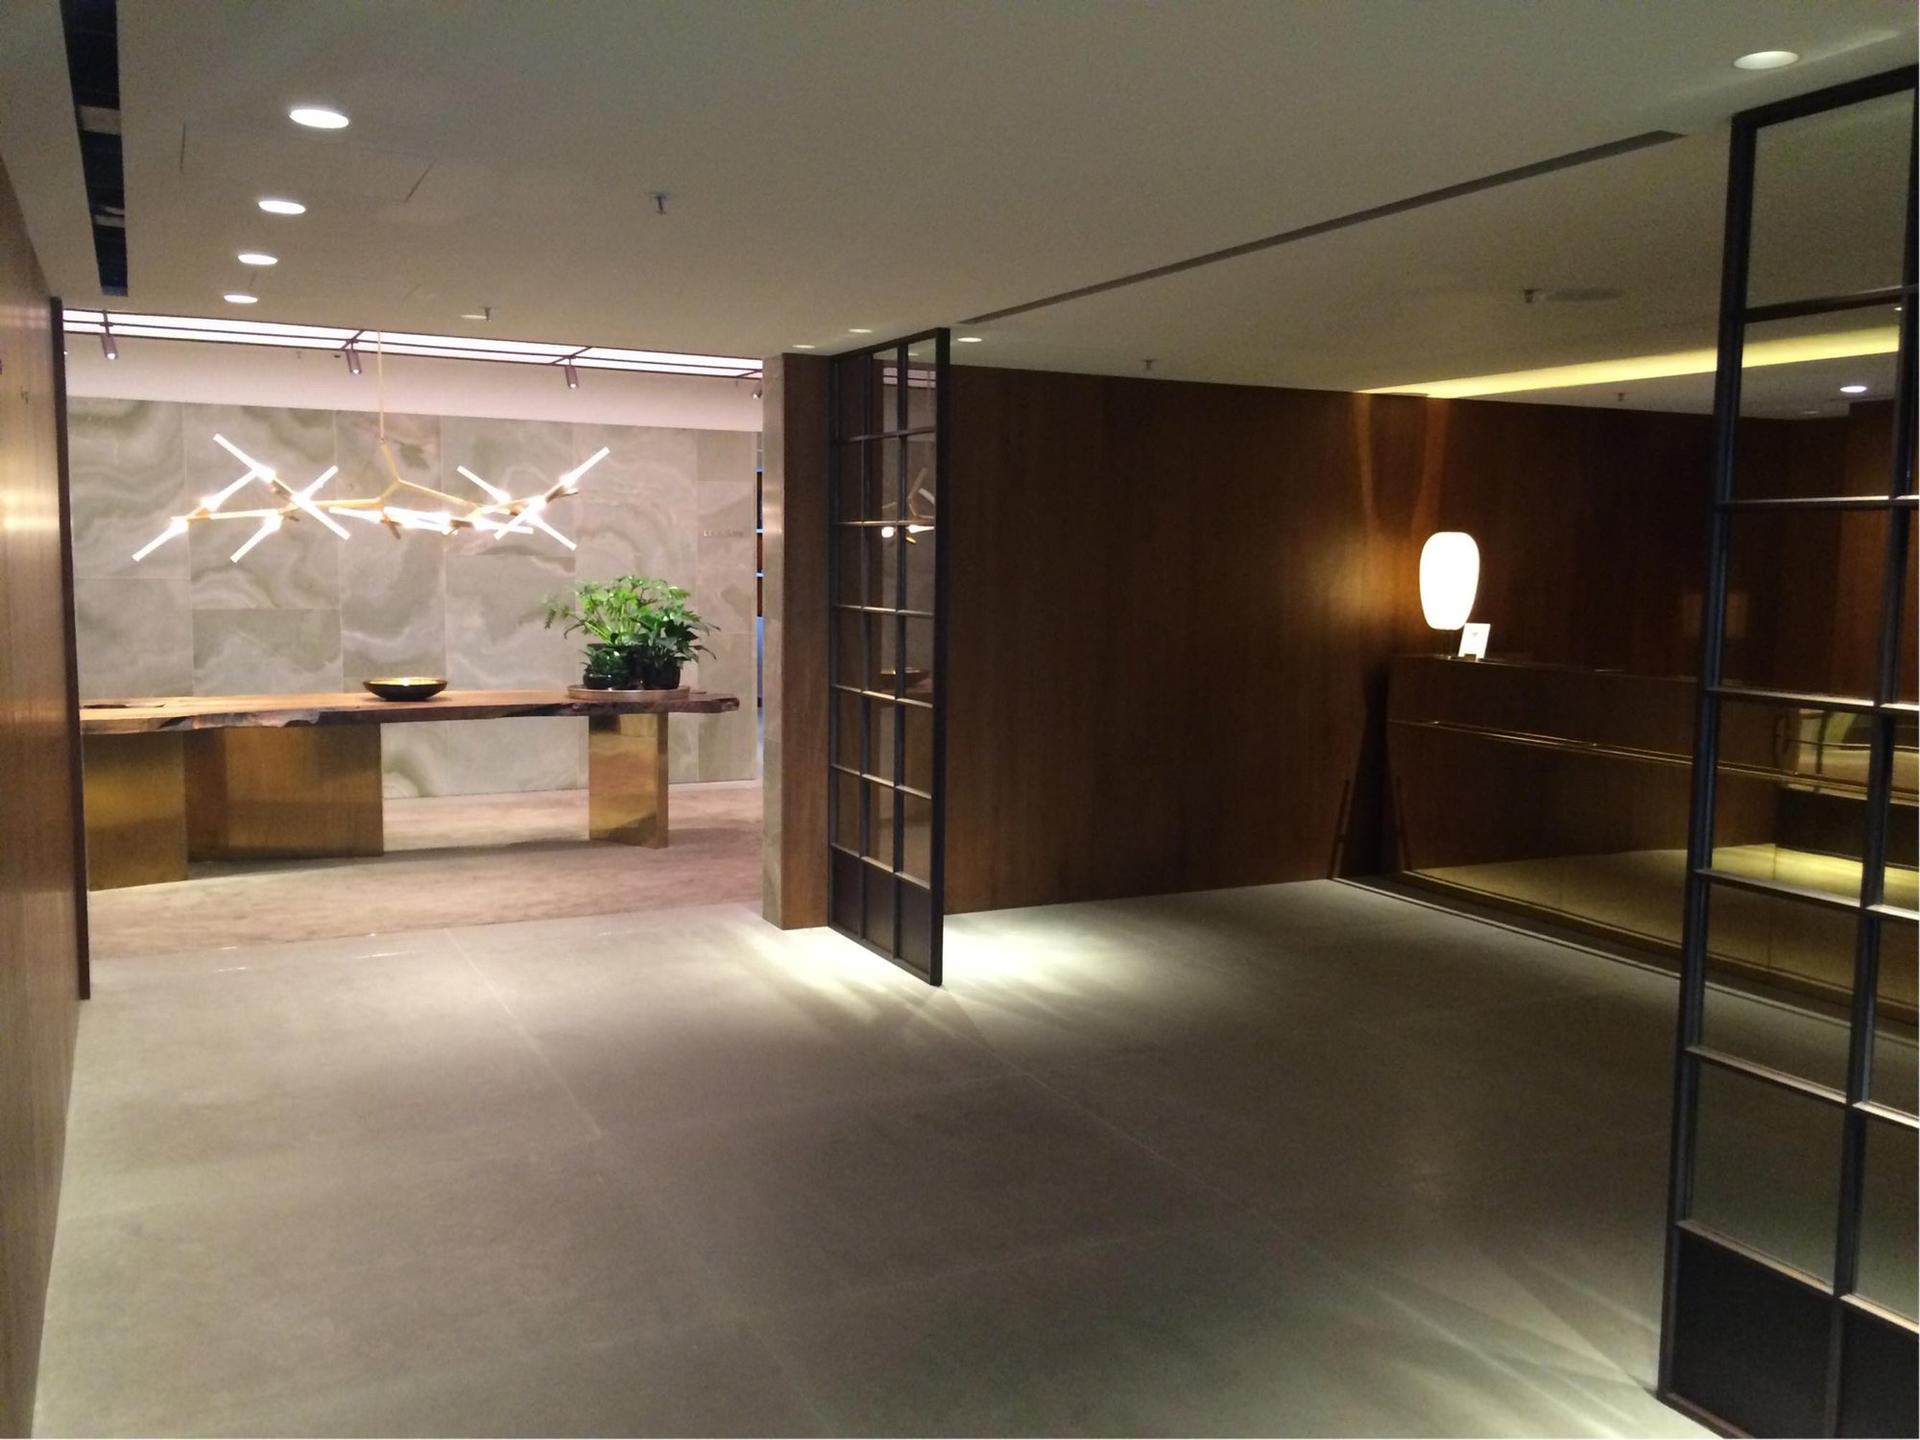 Cathay Pacific The Pier First Class Lounge image 17 of 100